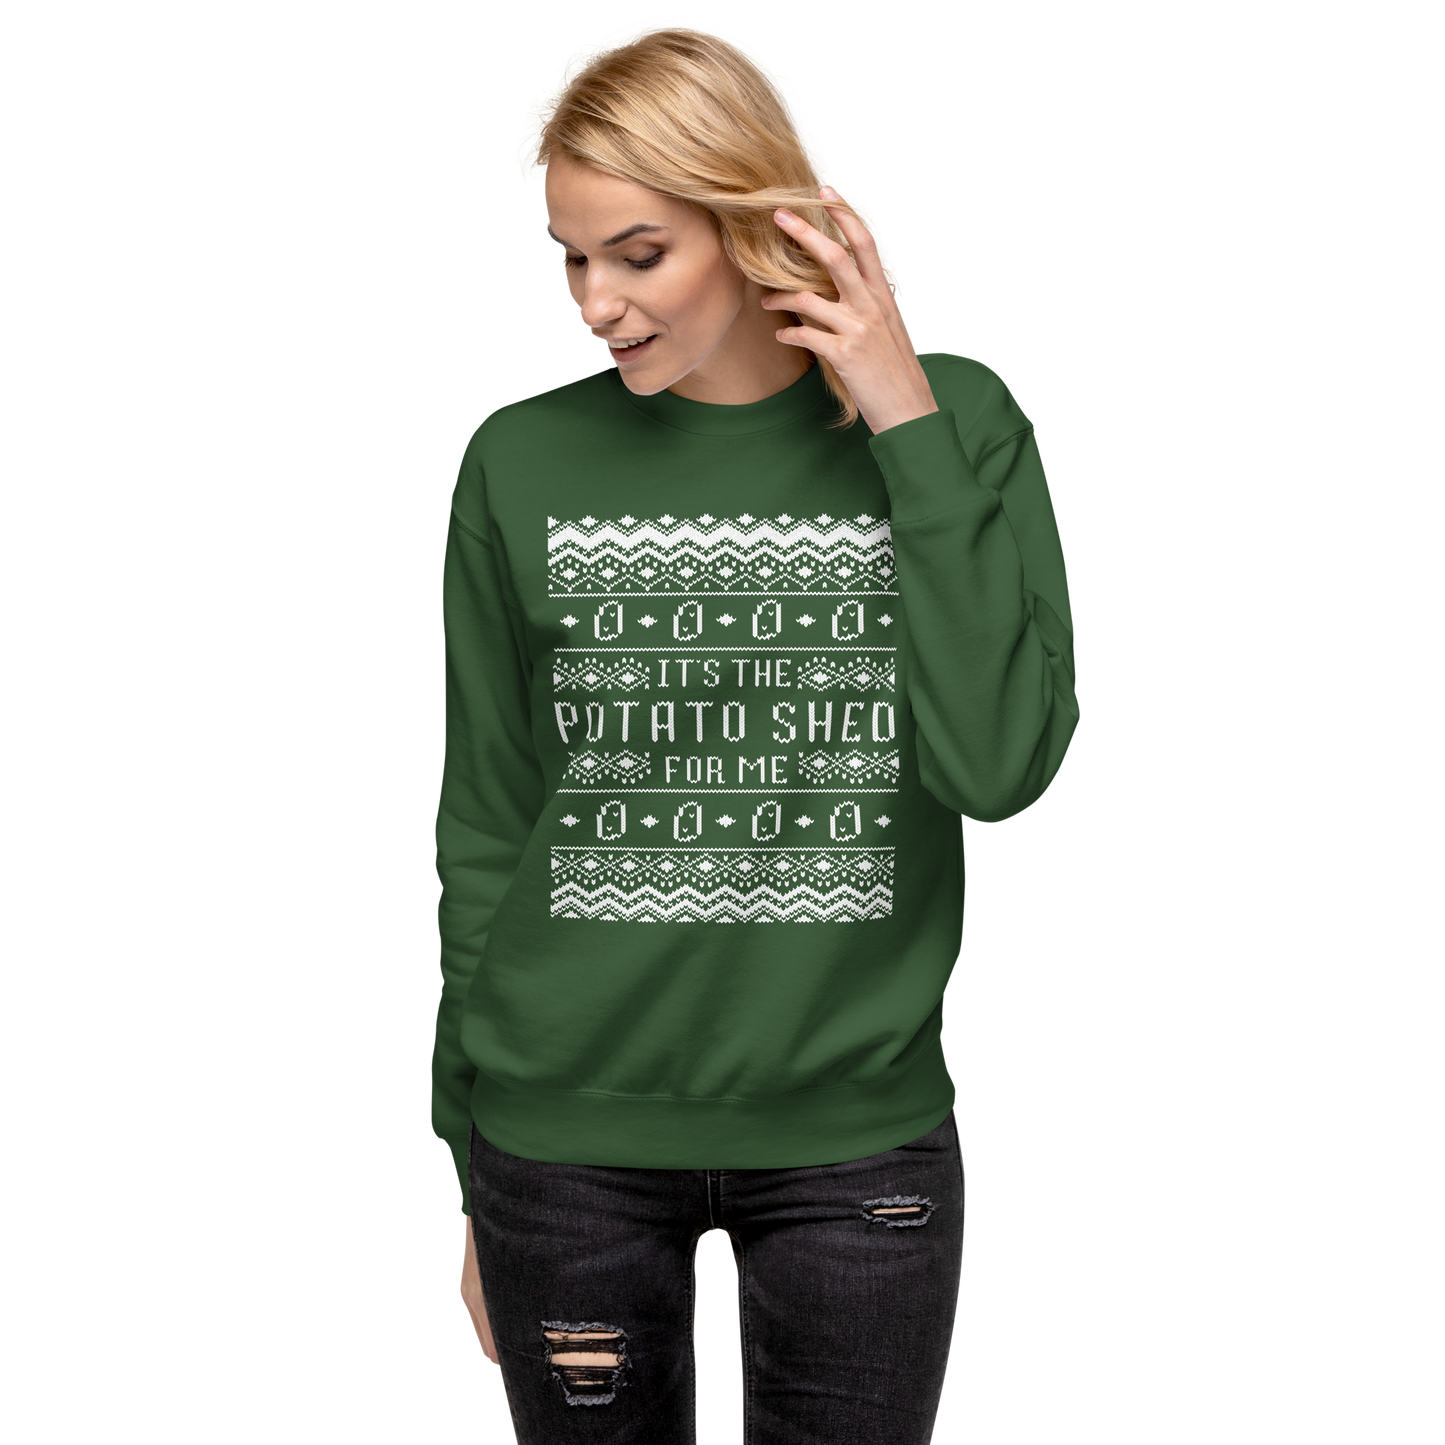 It's The Potato Shed For Me White Unisex Sweater